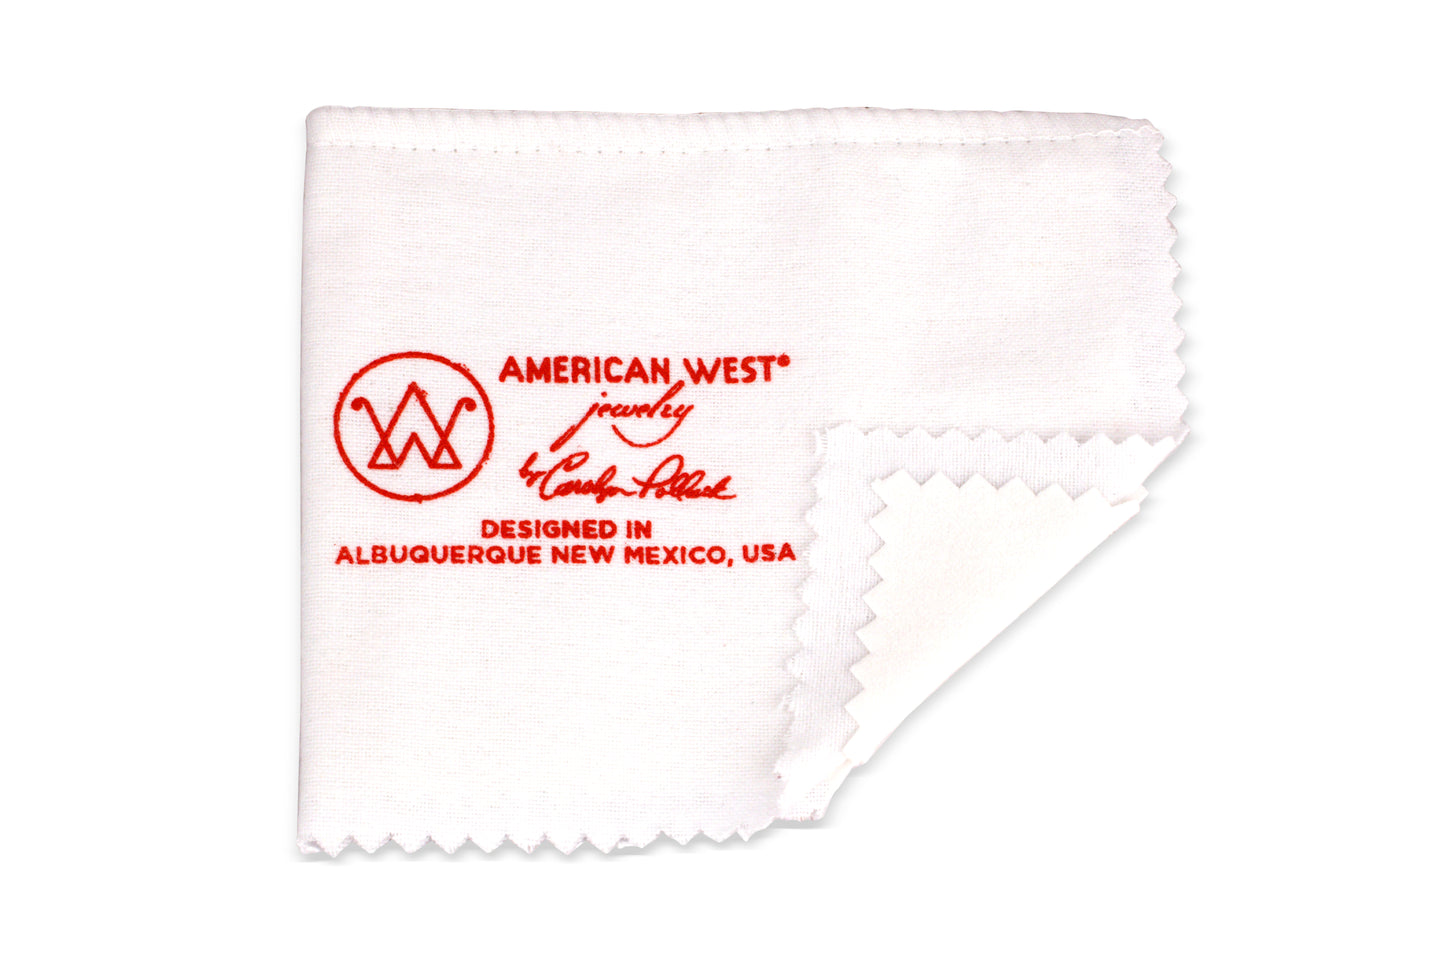 American West Jewelry Polishing Cloth, 8 x 9 Inches